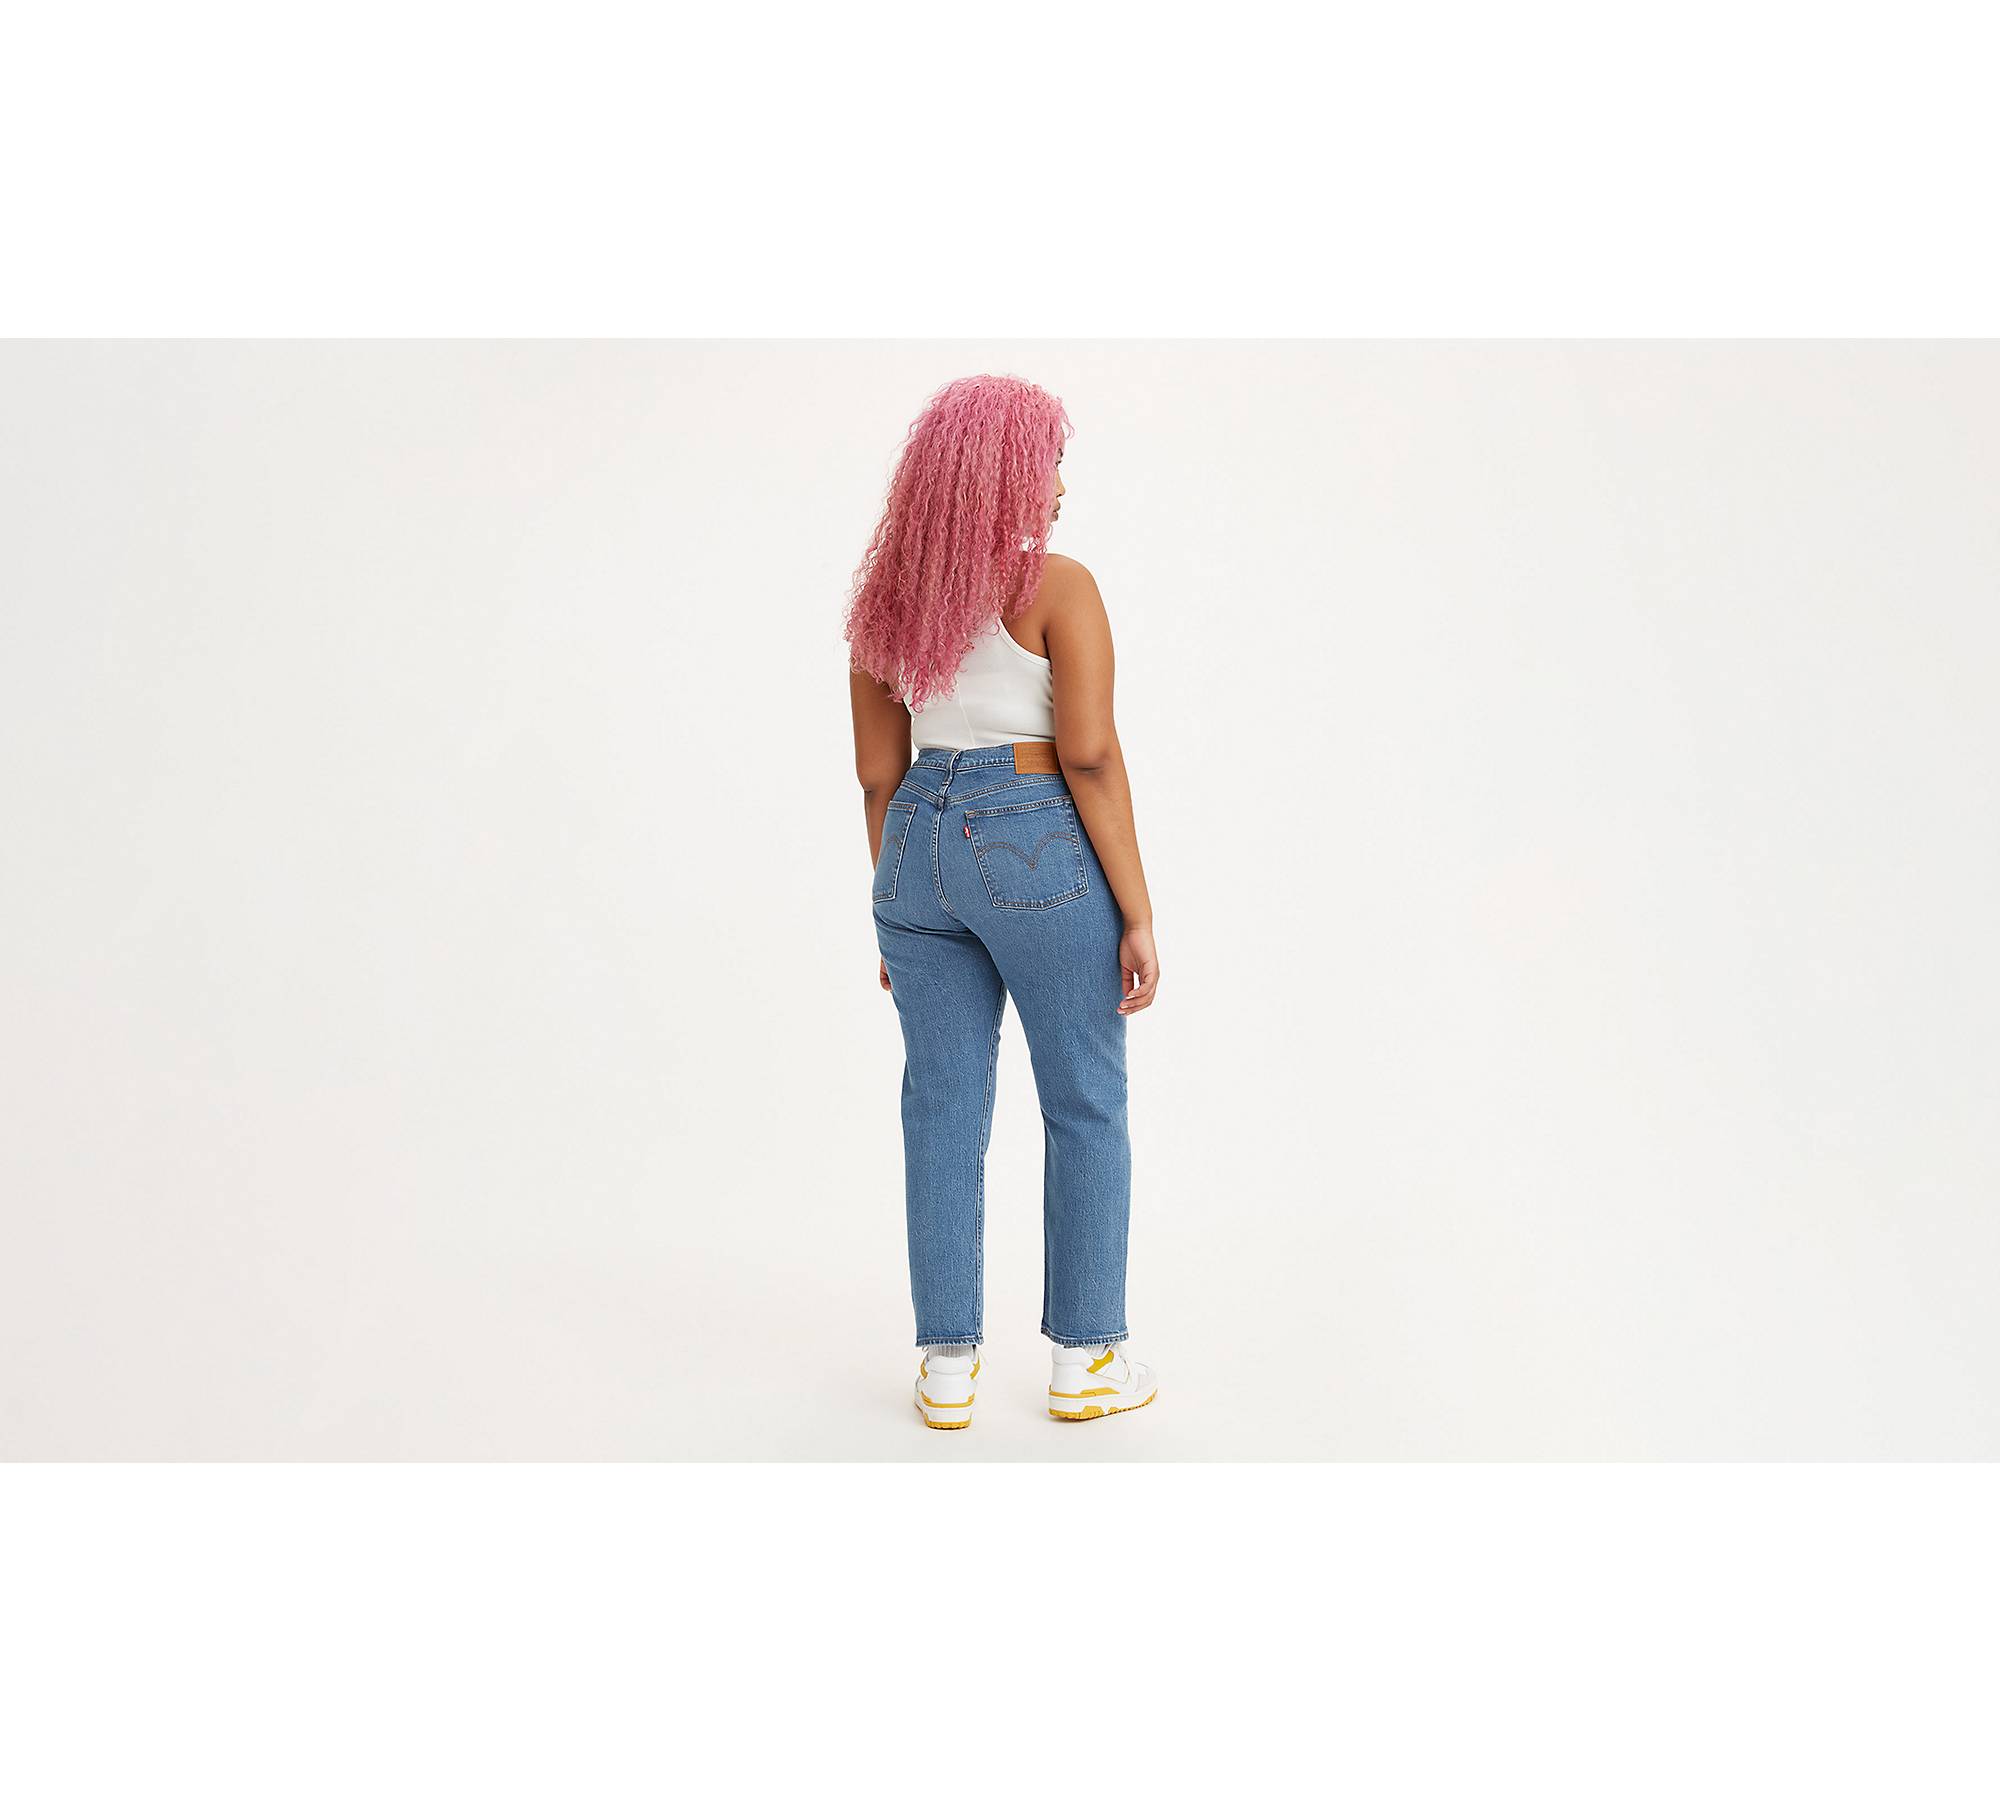 Denizen® From Levi's® Women's Mid-rise 90's Loose Straight Jeans : Target